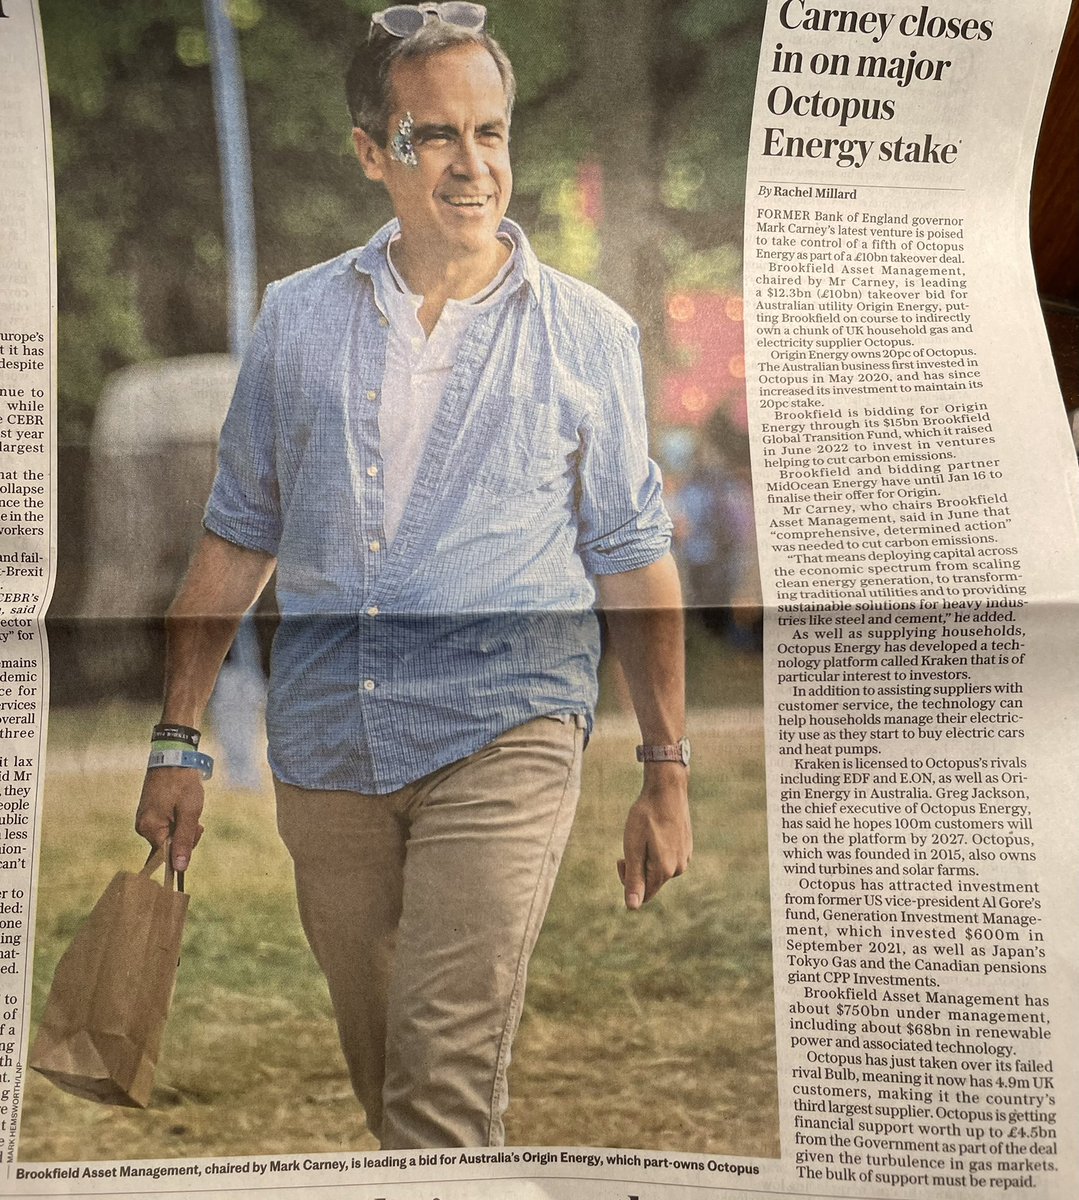 Readers of my column hem-hem will know my view that it is #Octopus, not HMG, that runs energy policy in the UK. Now the plot thickens. #MarkCarney, Oz, Al Gore and... Tokyo Gas. 

More importantly: what is Carney wearing next to one of his sexy eyebrows?